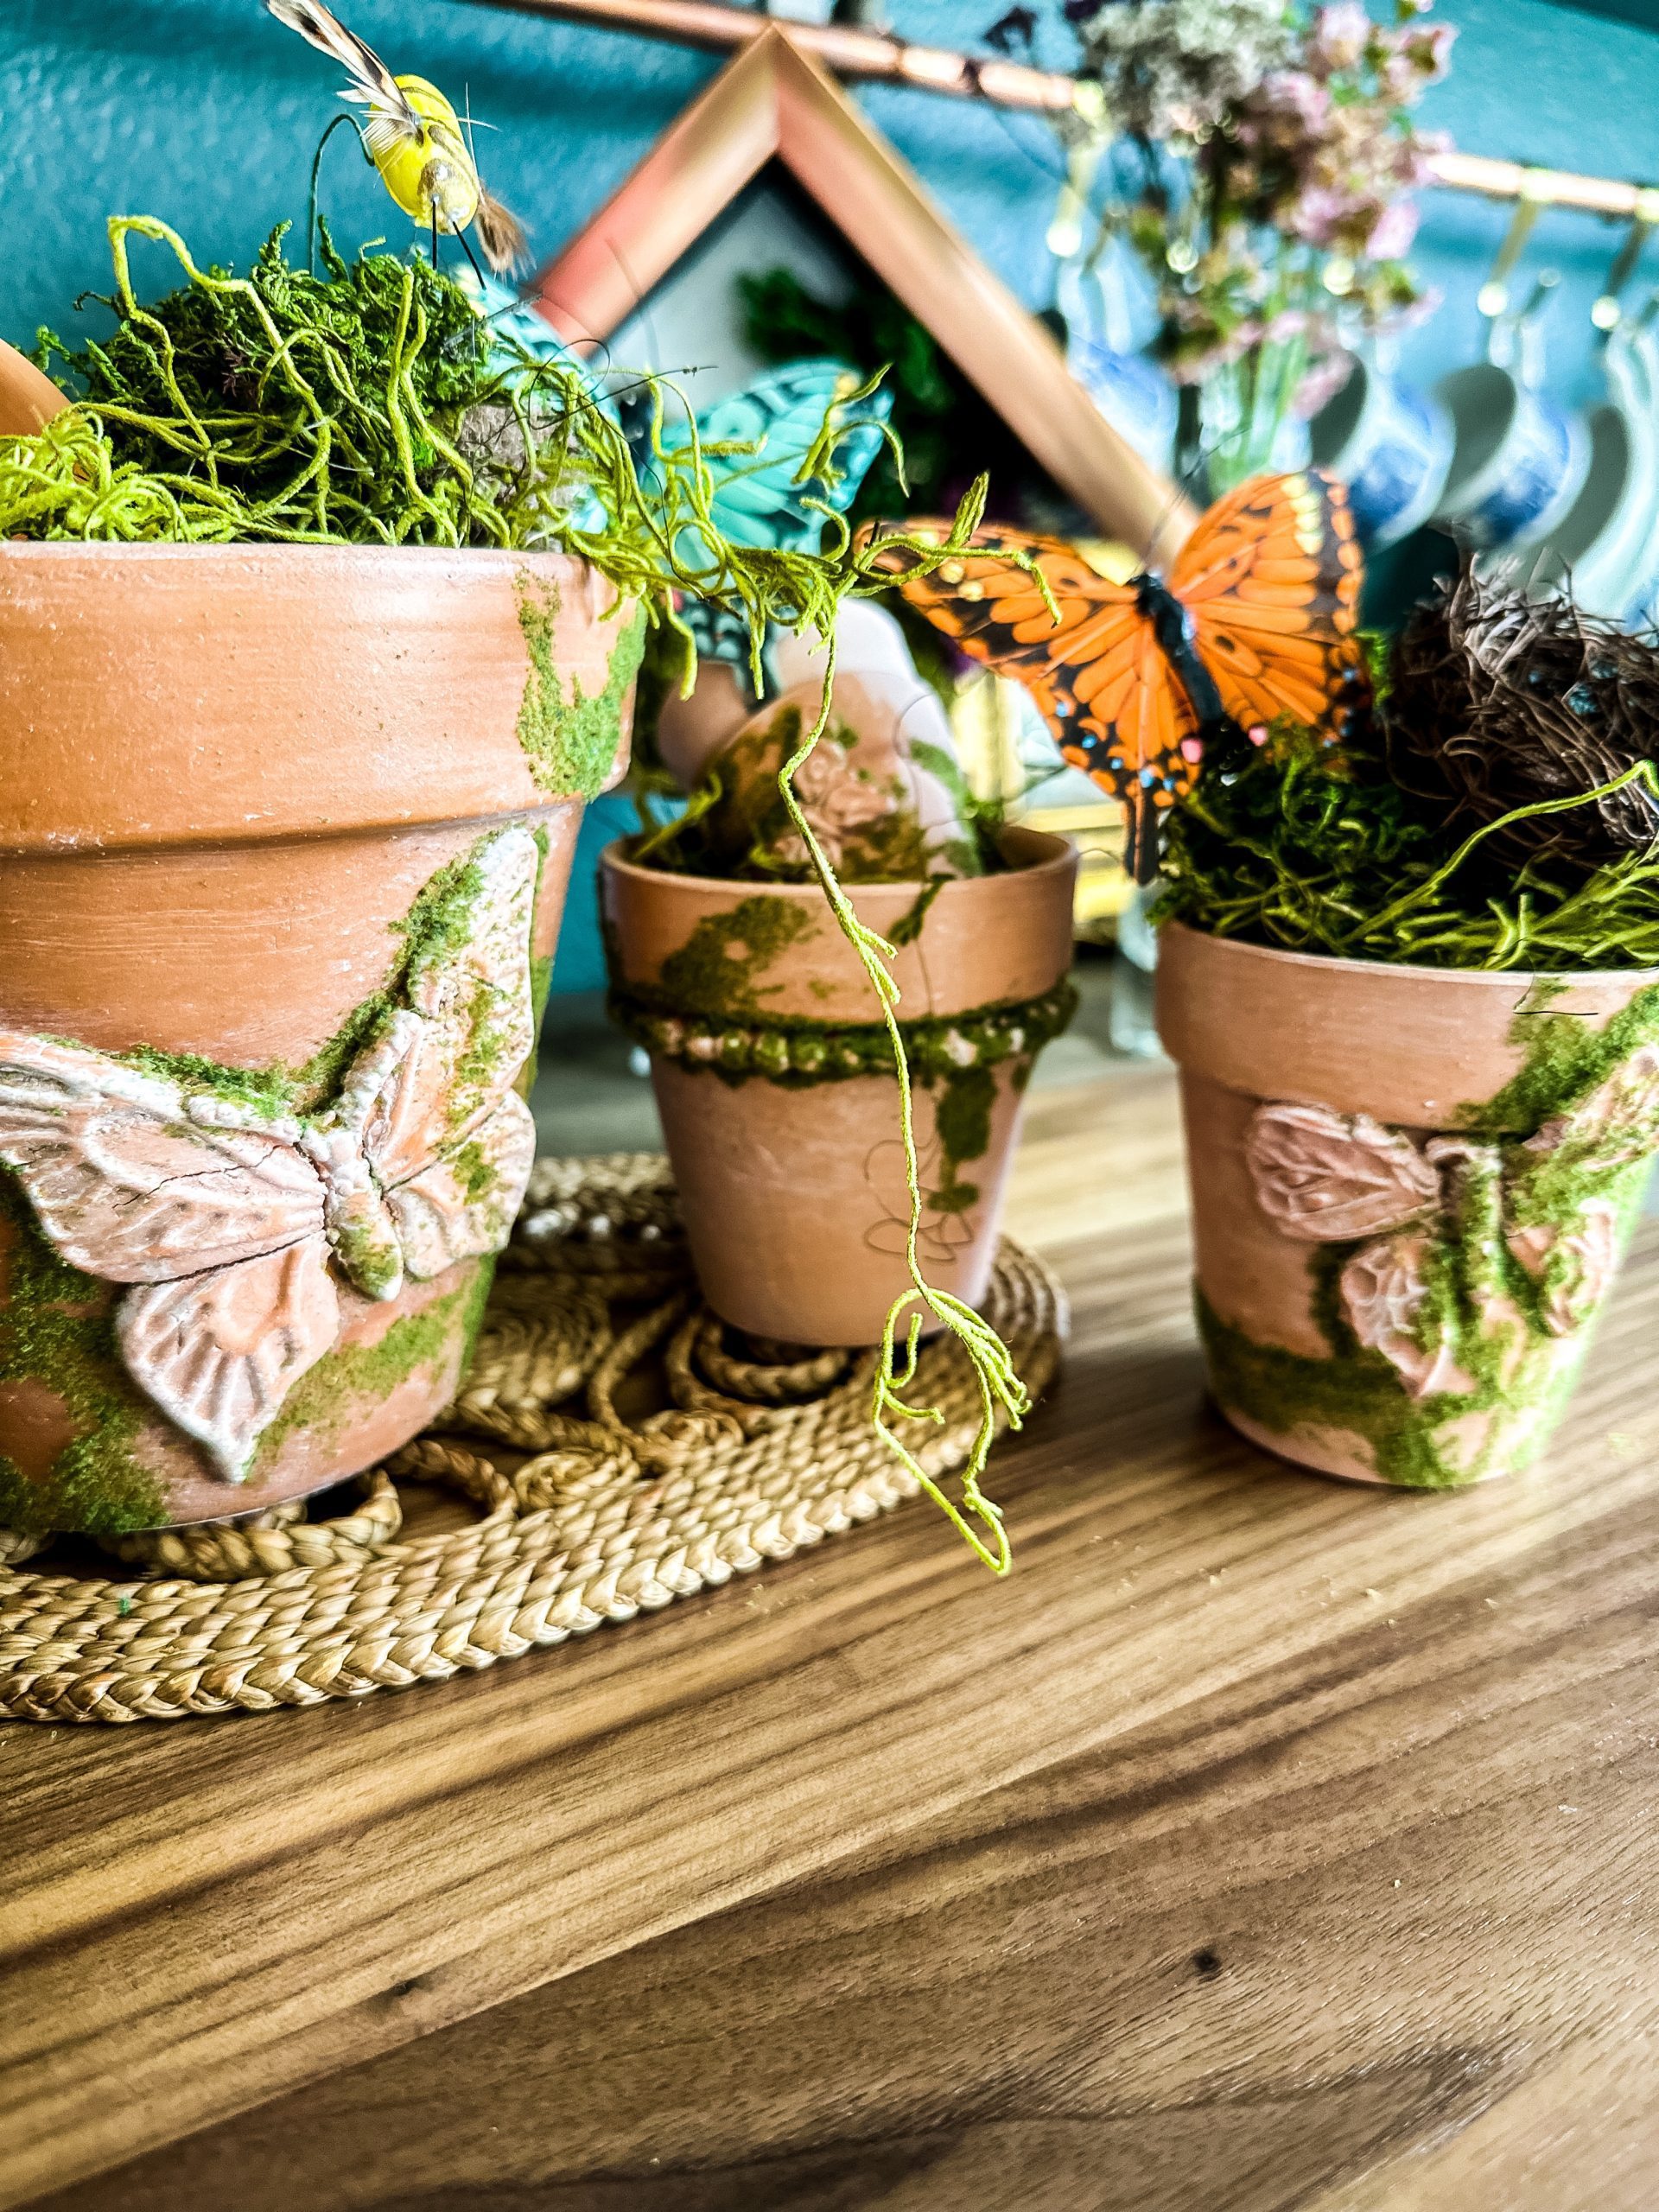 How To Make Terra Cotta Pots Look Vintage Using Crayola Air Dry Clay